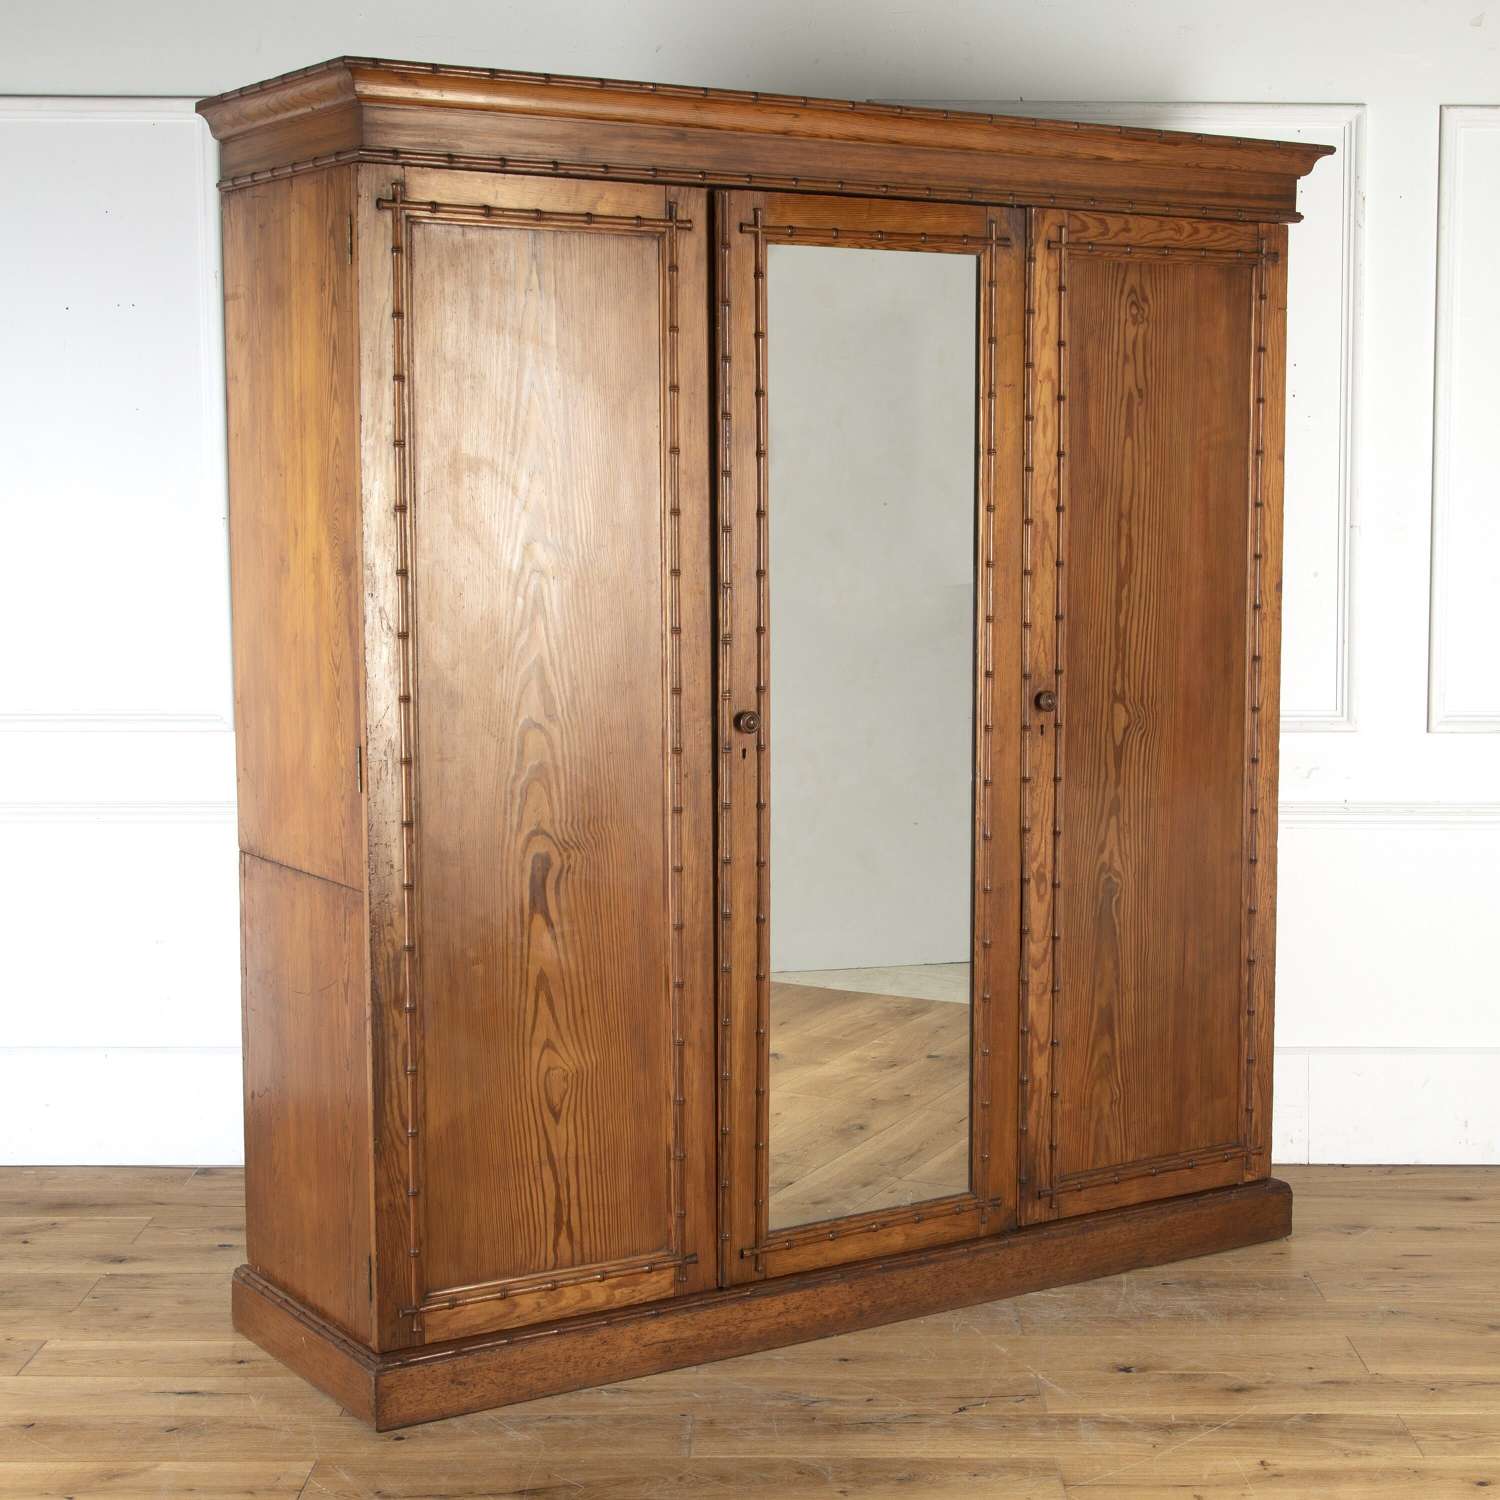 A Howard and Sons Faux Bamboo compactum wardrobe